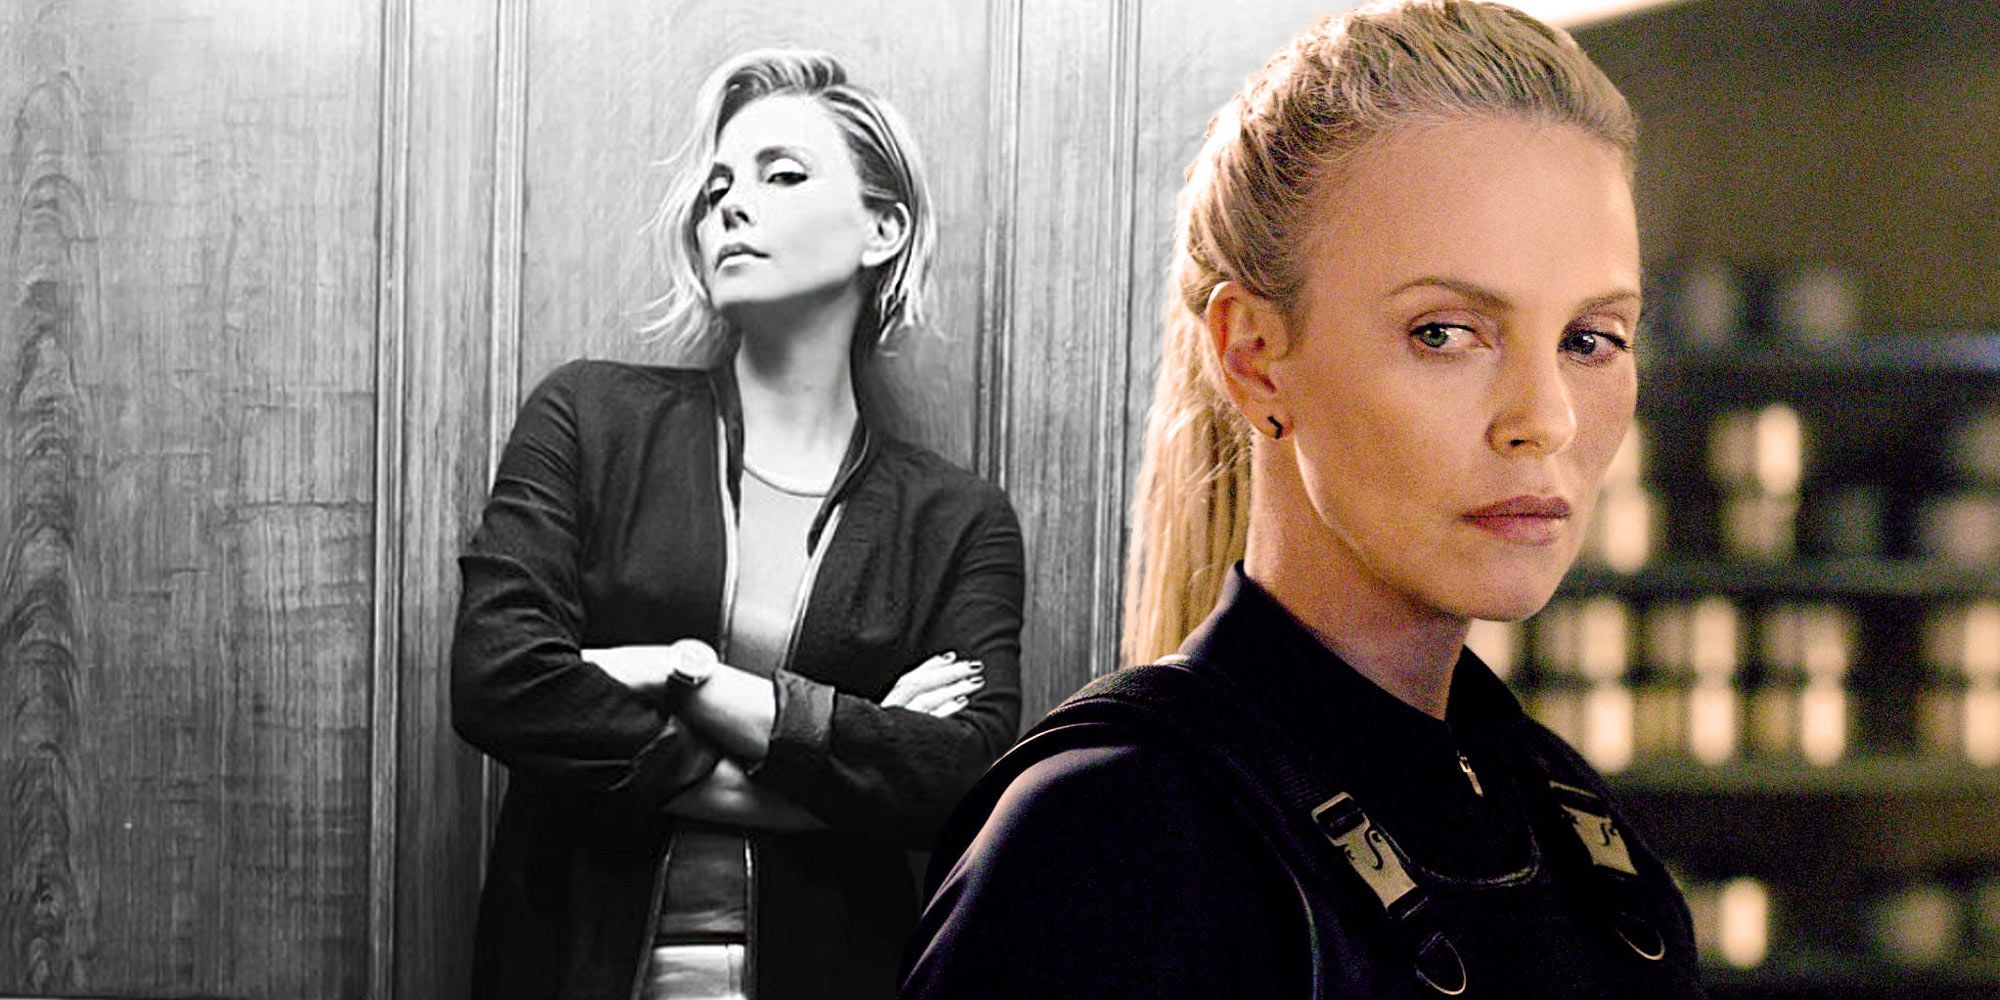 Charlize Theron as Cipher in Fast and Furious 10